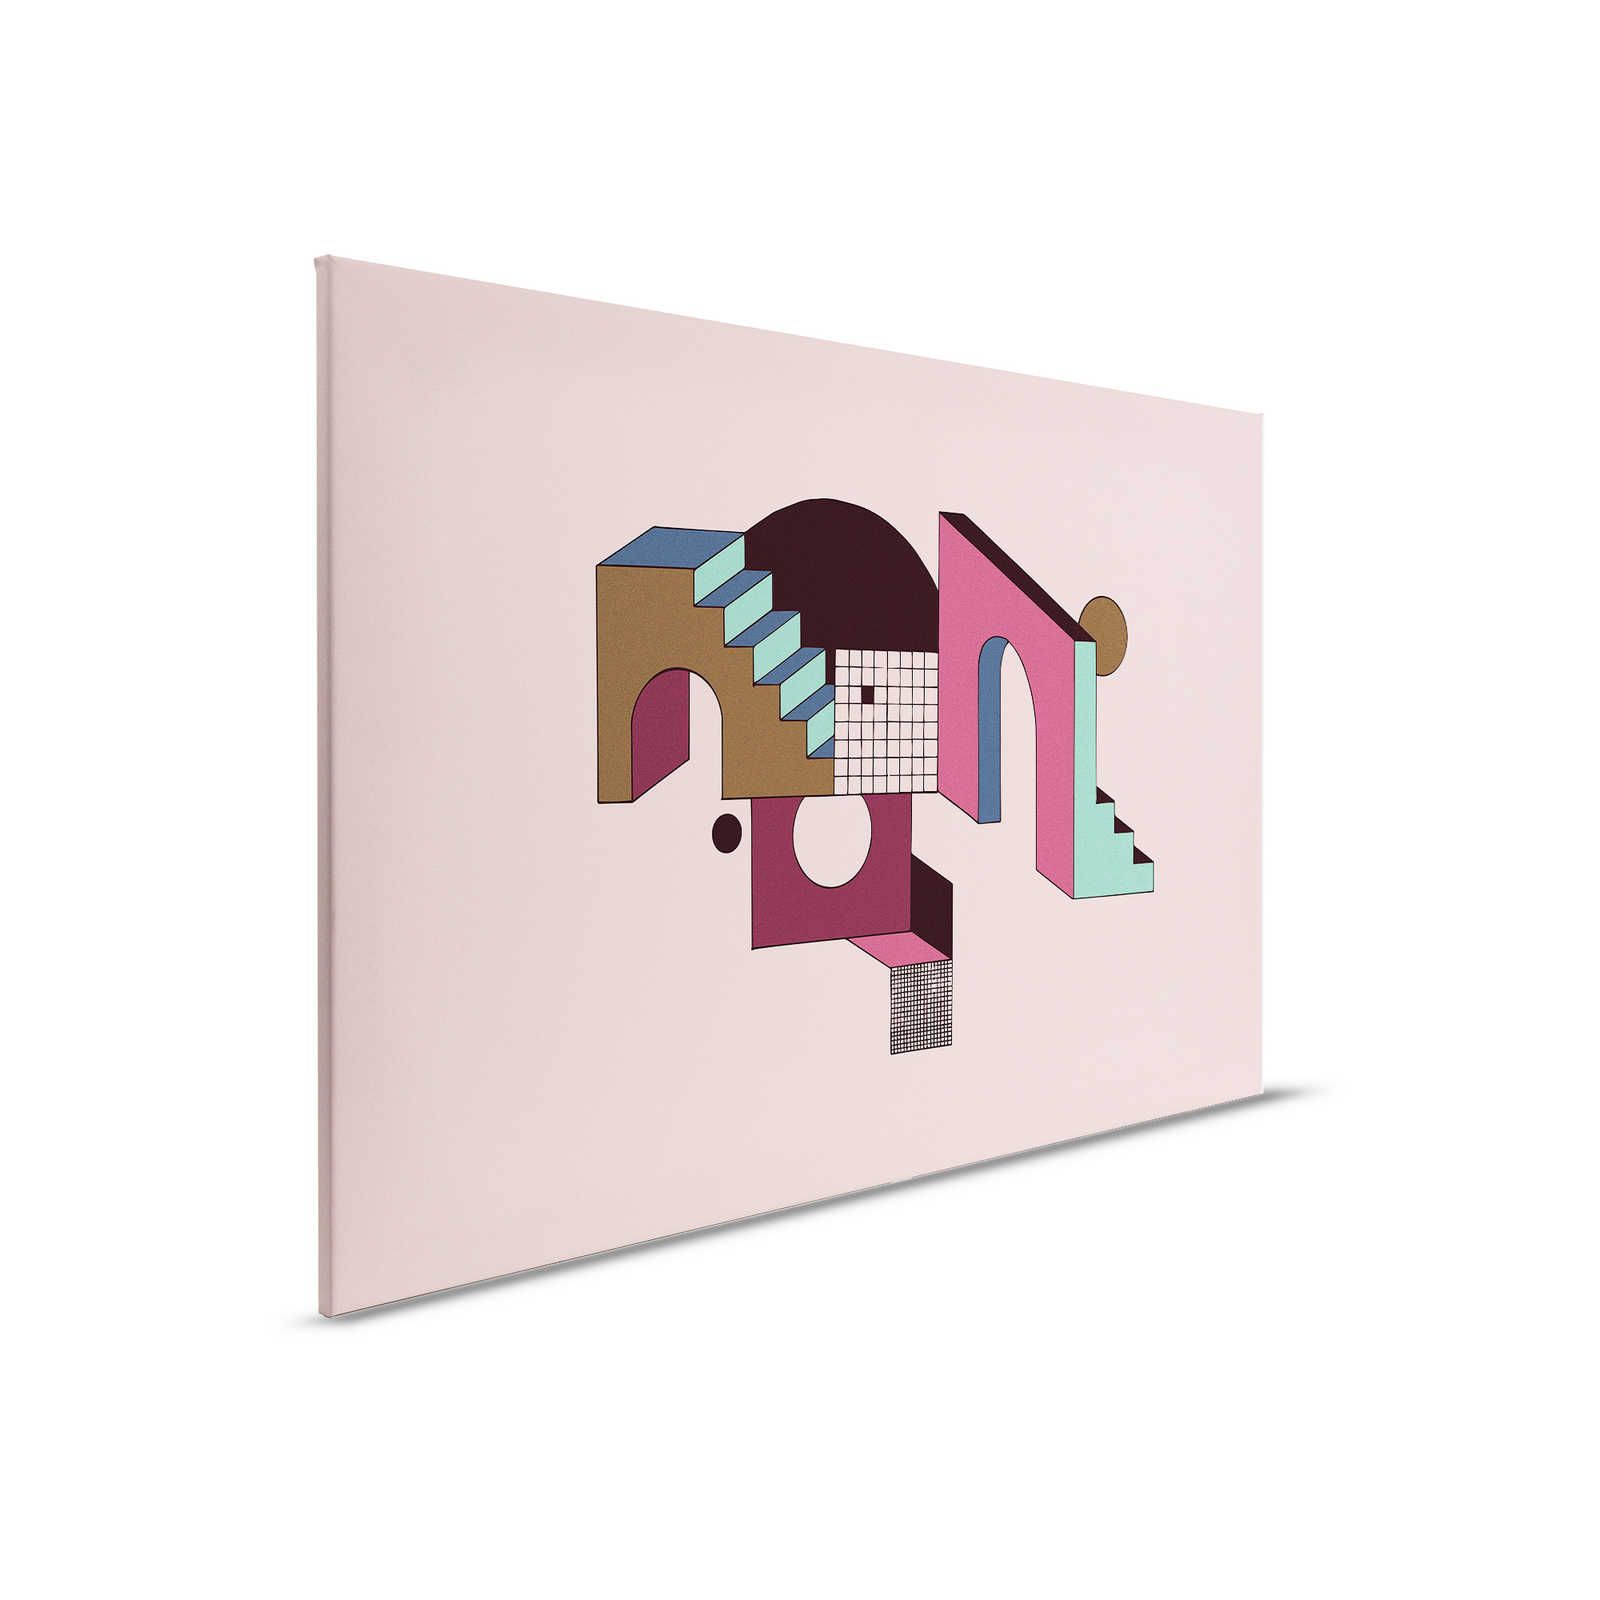         Freetown 2 - Pink Canvas painting abstract stairs architecture - 0.90 m x 0.60 m
    